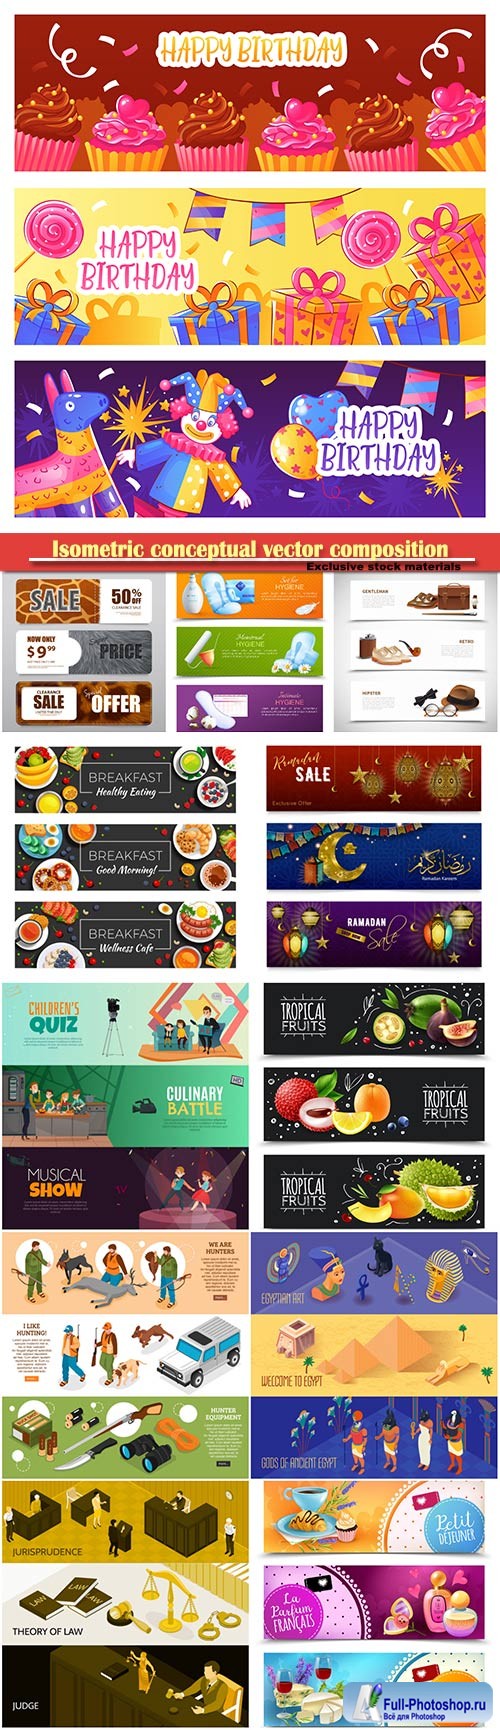 Isometric conceptual vector composition, infographics template, horizontal banners set